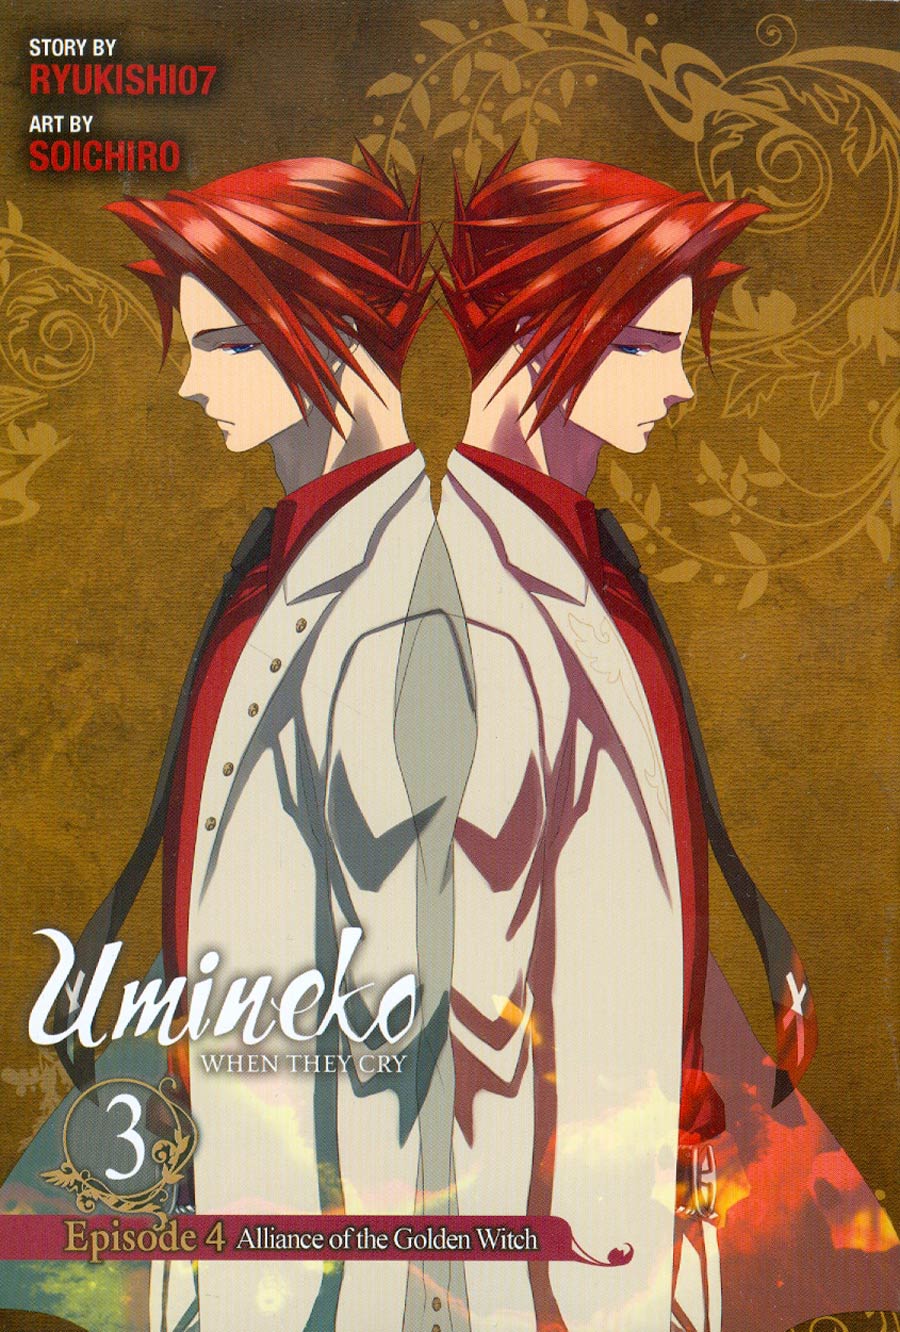 Umineko When They Cry Vol 9 Episode 4 Alliance Of The Golden Witch Part 3 GN